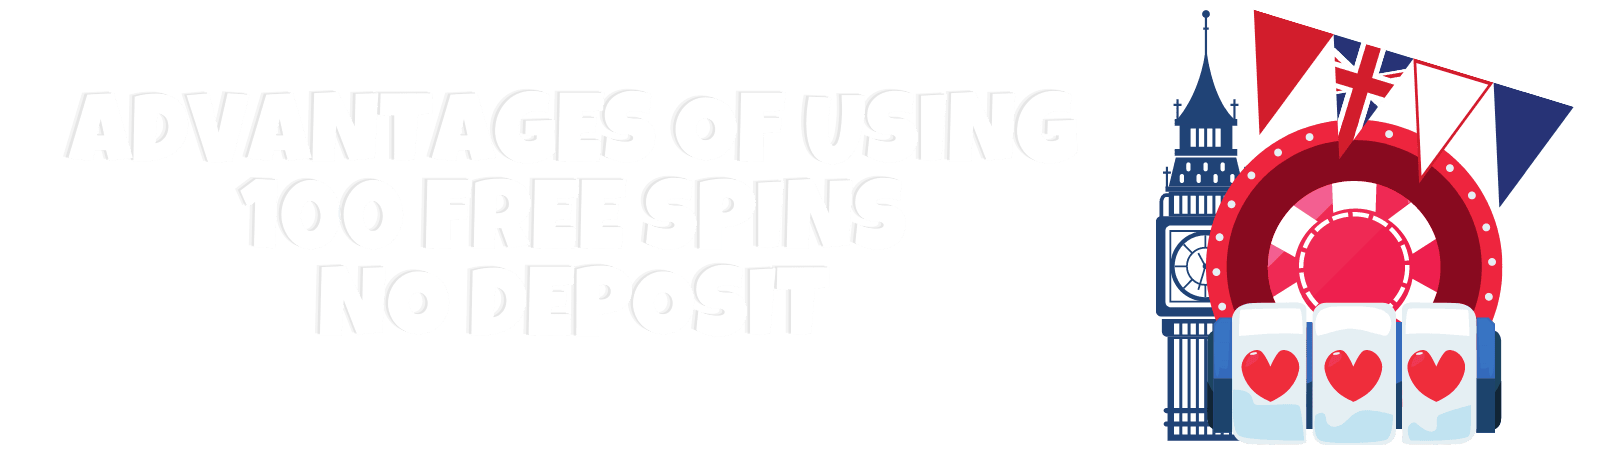 Advantages of Using 100 Free Spins No Deposit img